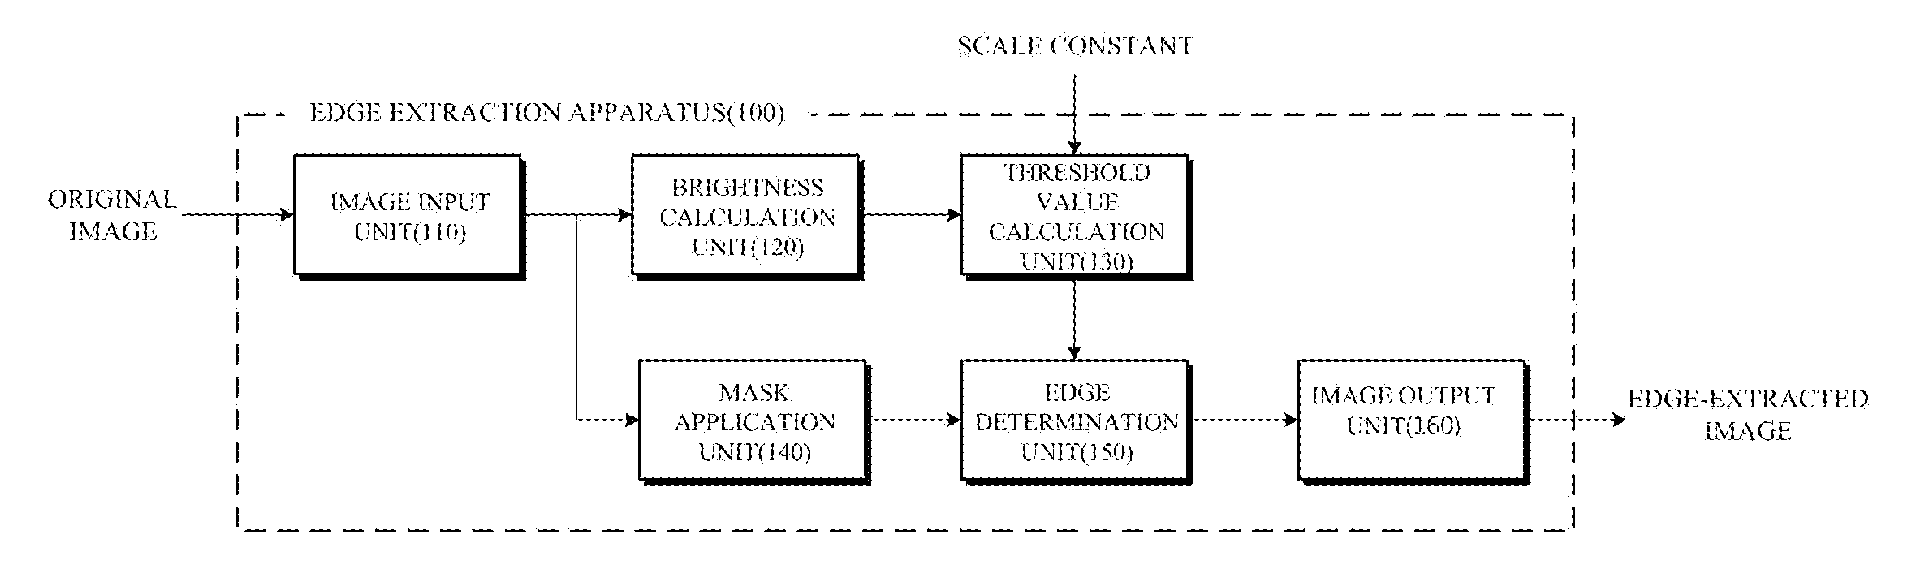 Apparatus and method for extracting edges of image